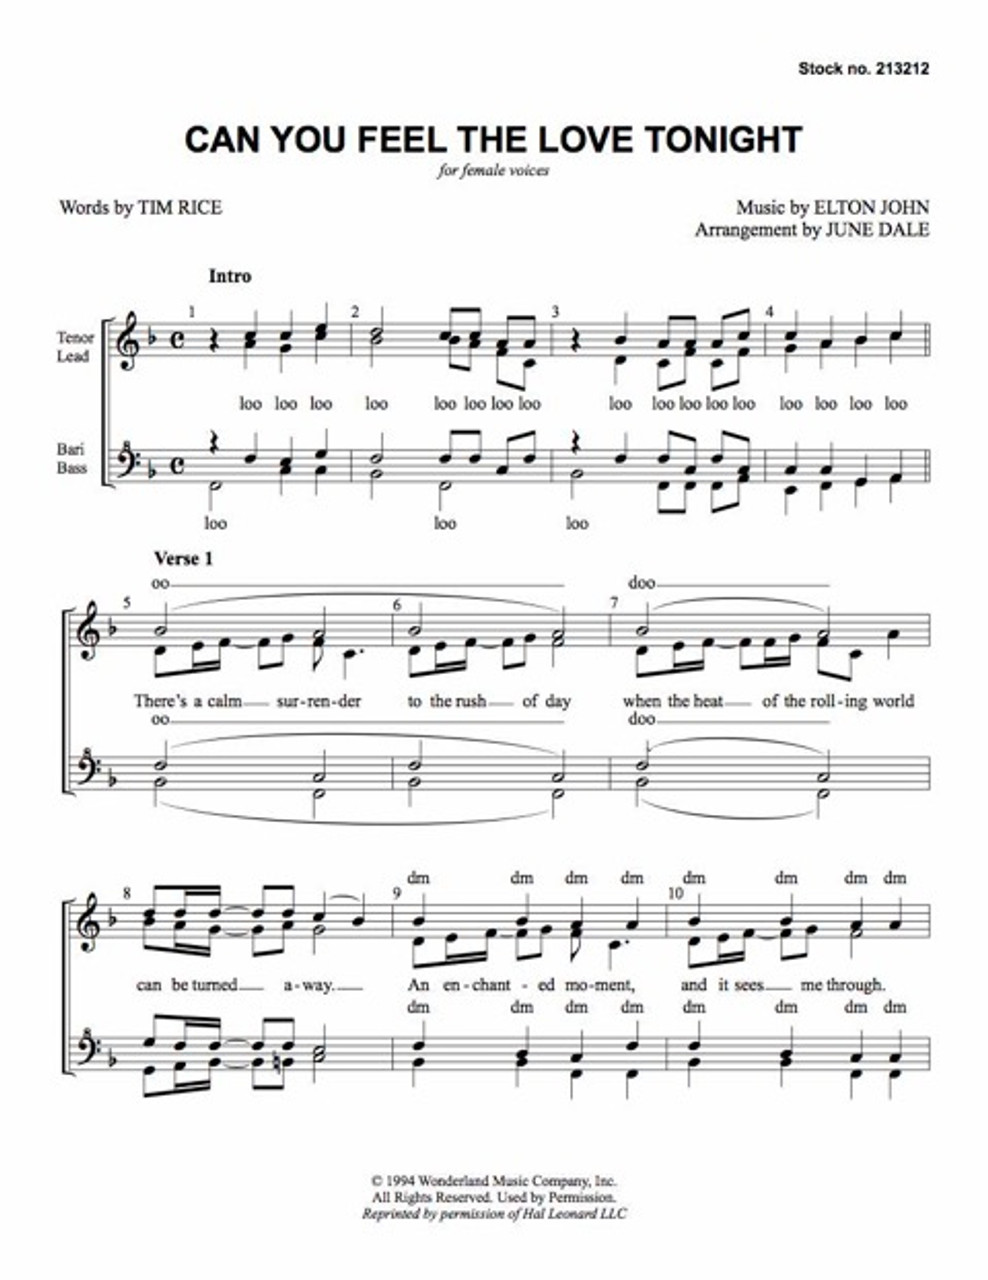 Can You Feel the Love Tonight? (SSAA) (arr. J. Dale) - Download